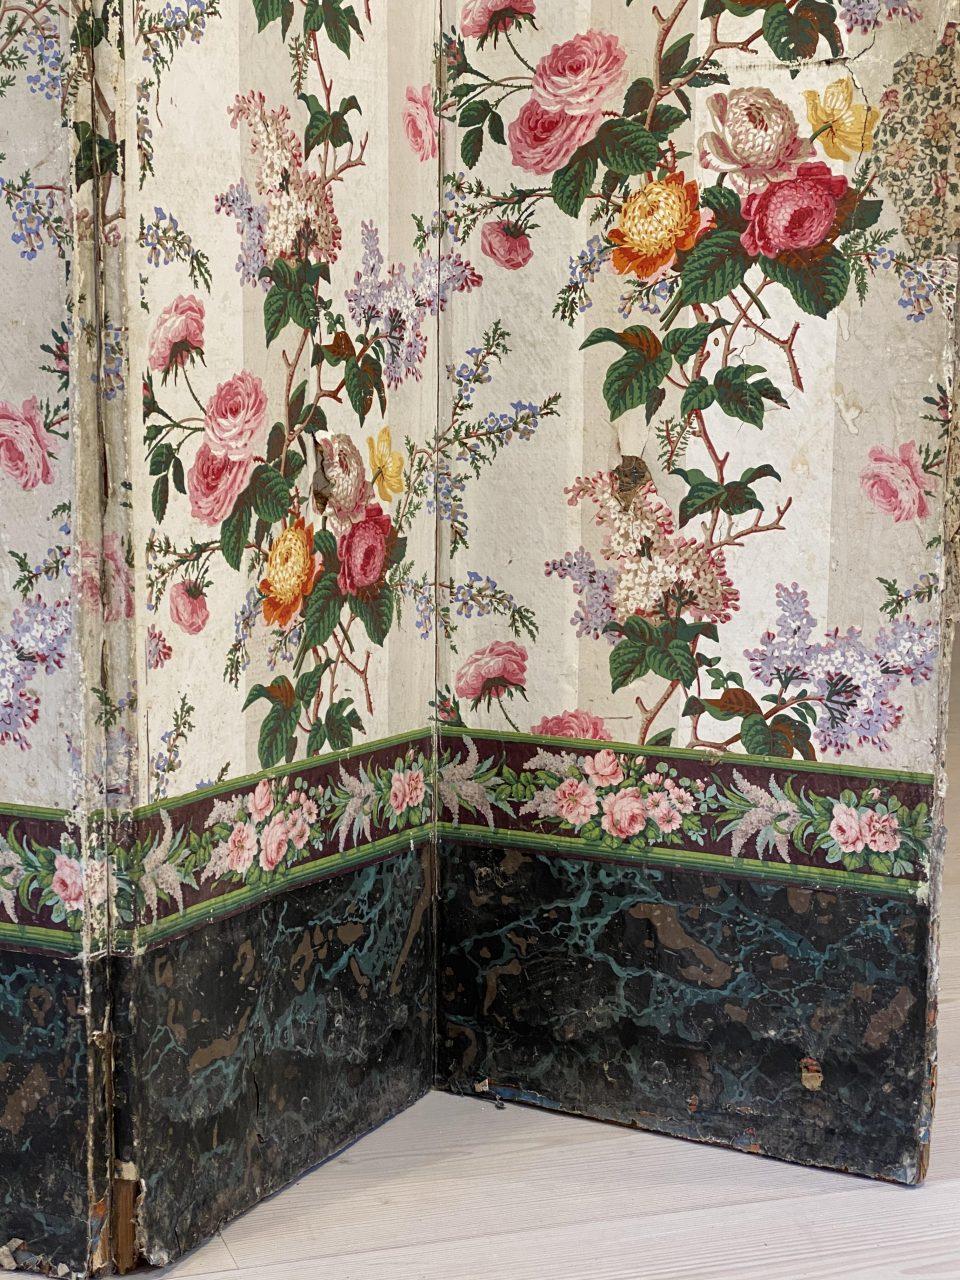 Exciting and imaginative French Paravent or screen partition wall / folding screen, in wonderfully exuberent wallpaper, with a gorgeous floral pattern of roses and lilacs on one side, and neutral tones on the opposite side. Dating back to around